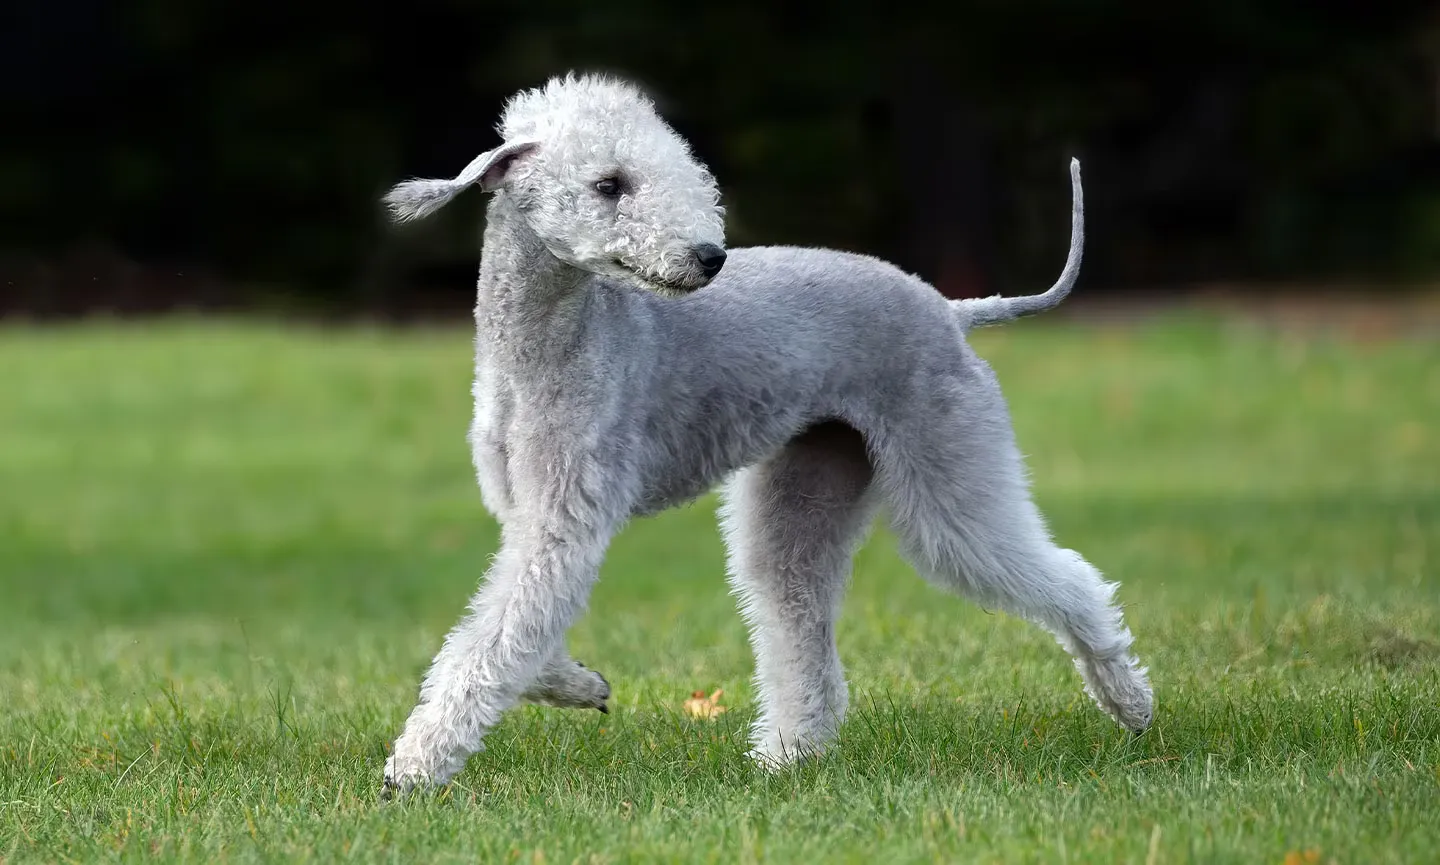 THE BEDLINGTON TERRIER: COMPLETE AND EASY TO READ GUIDE